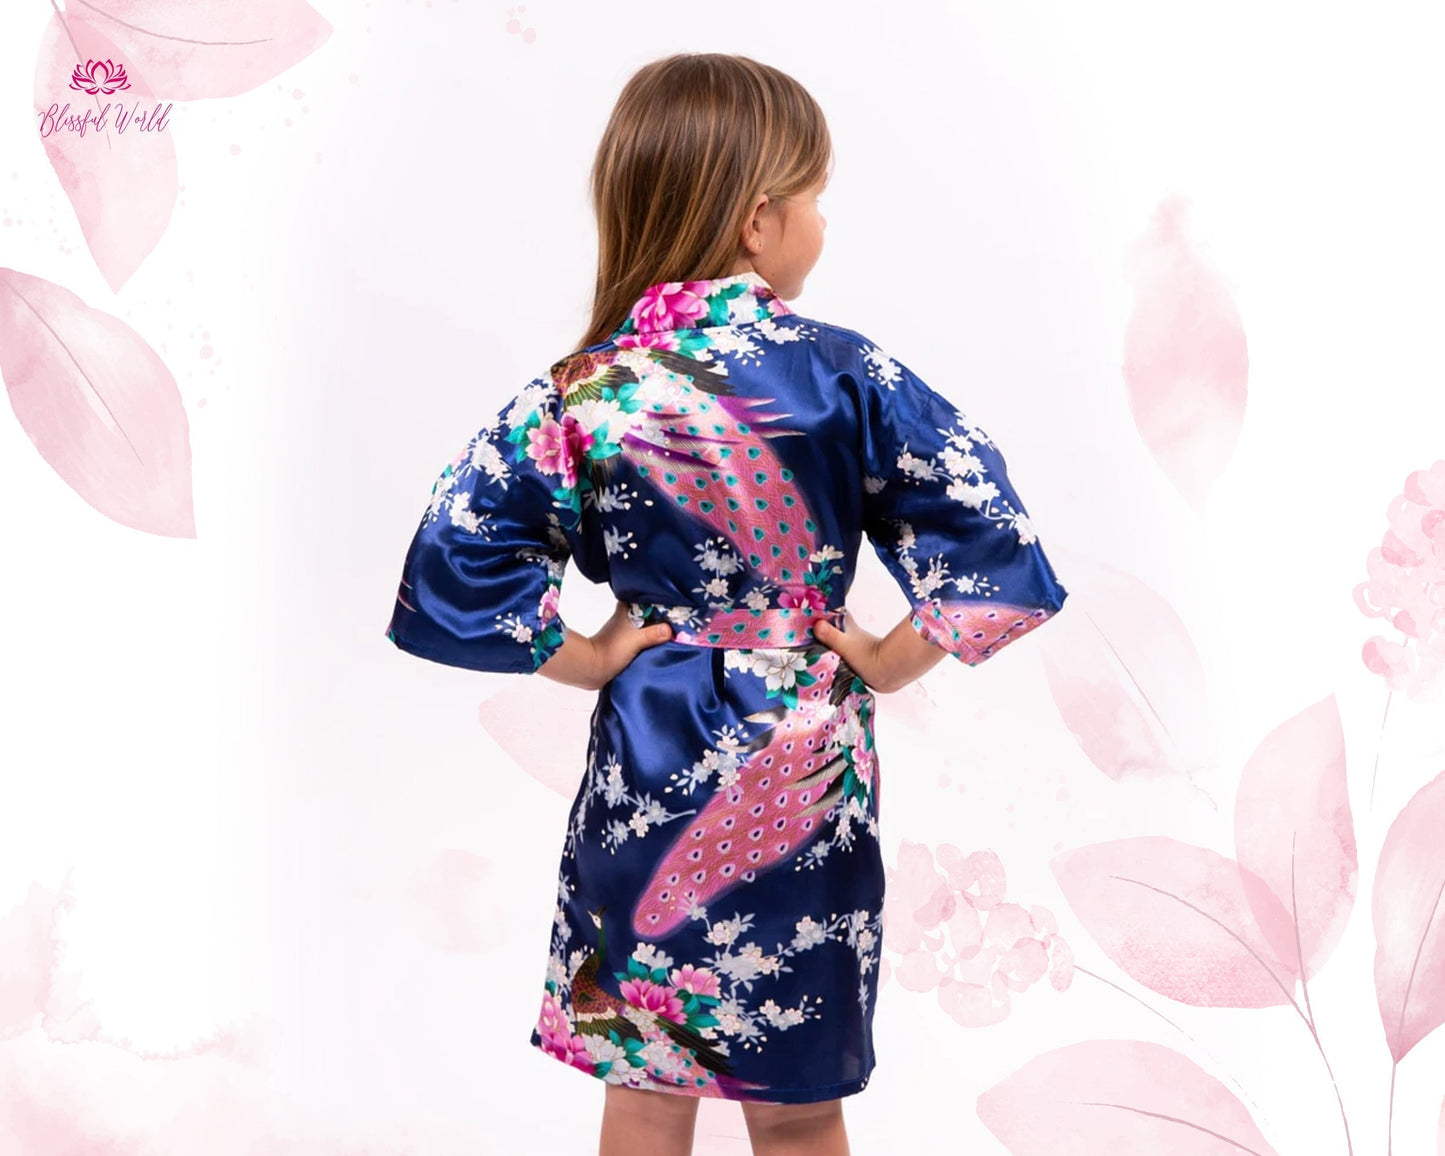 Flower Girl robes, Kids Floral Satin robes, Bridesmaid robes, Custom robe, Floral Kimono robes, Birthday party robes, Spa party robe, Gift for her, Party Robes, Wedding Robes, Robe